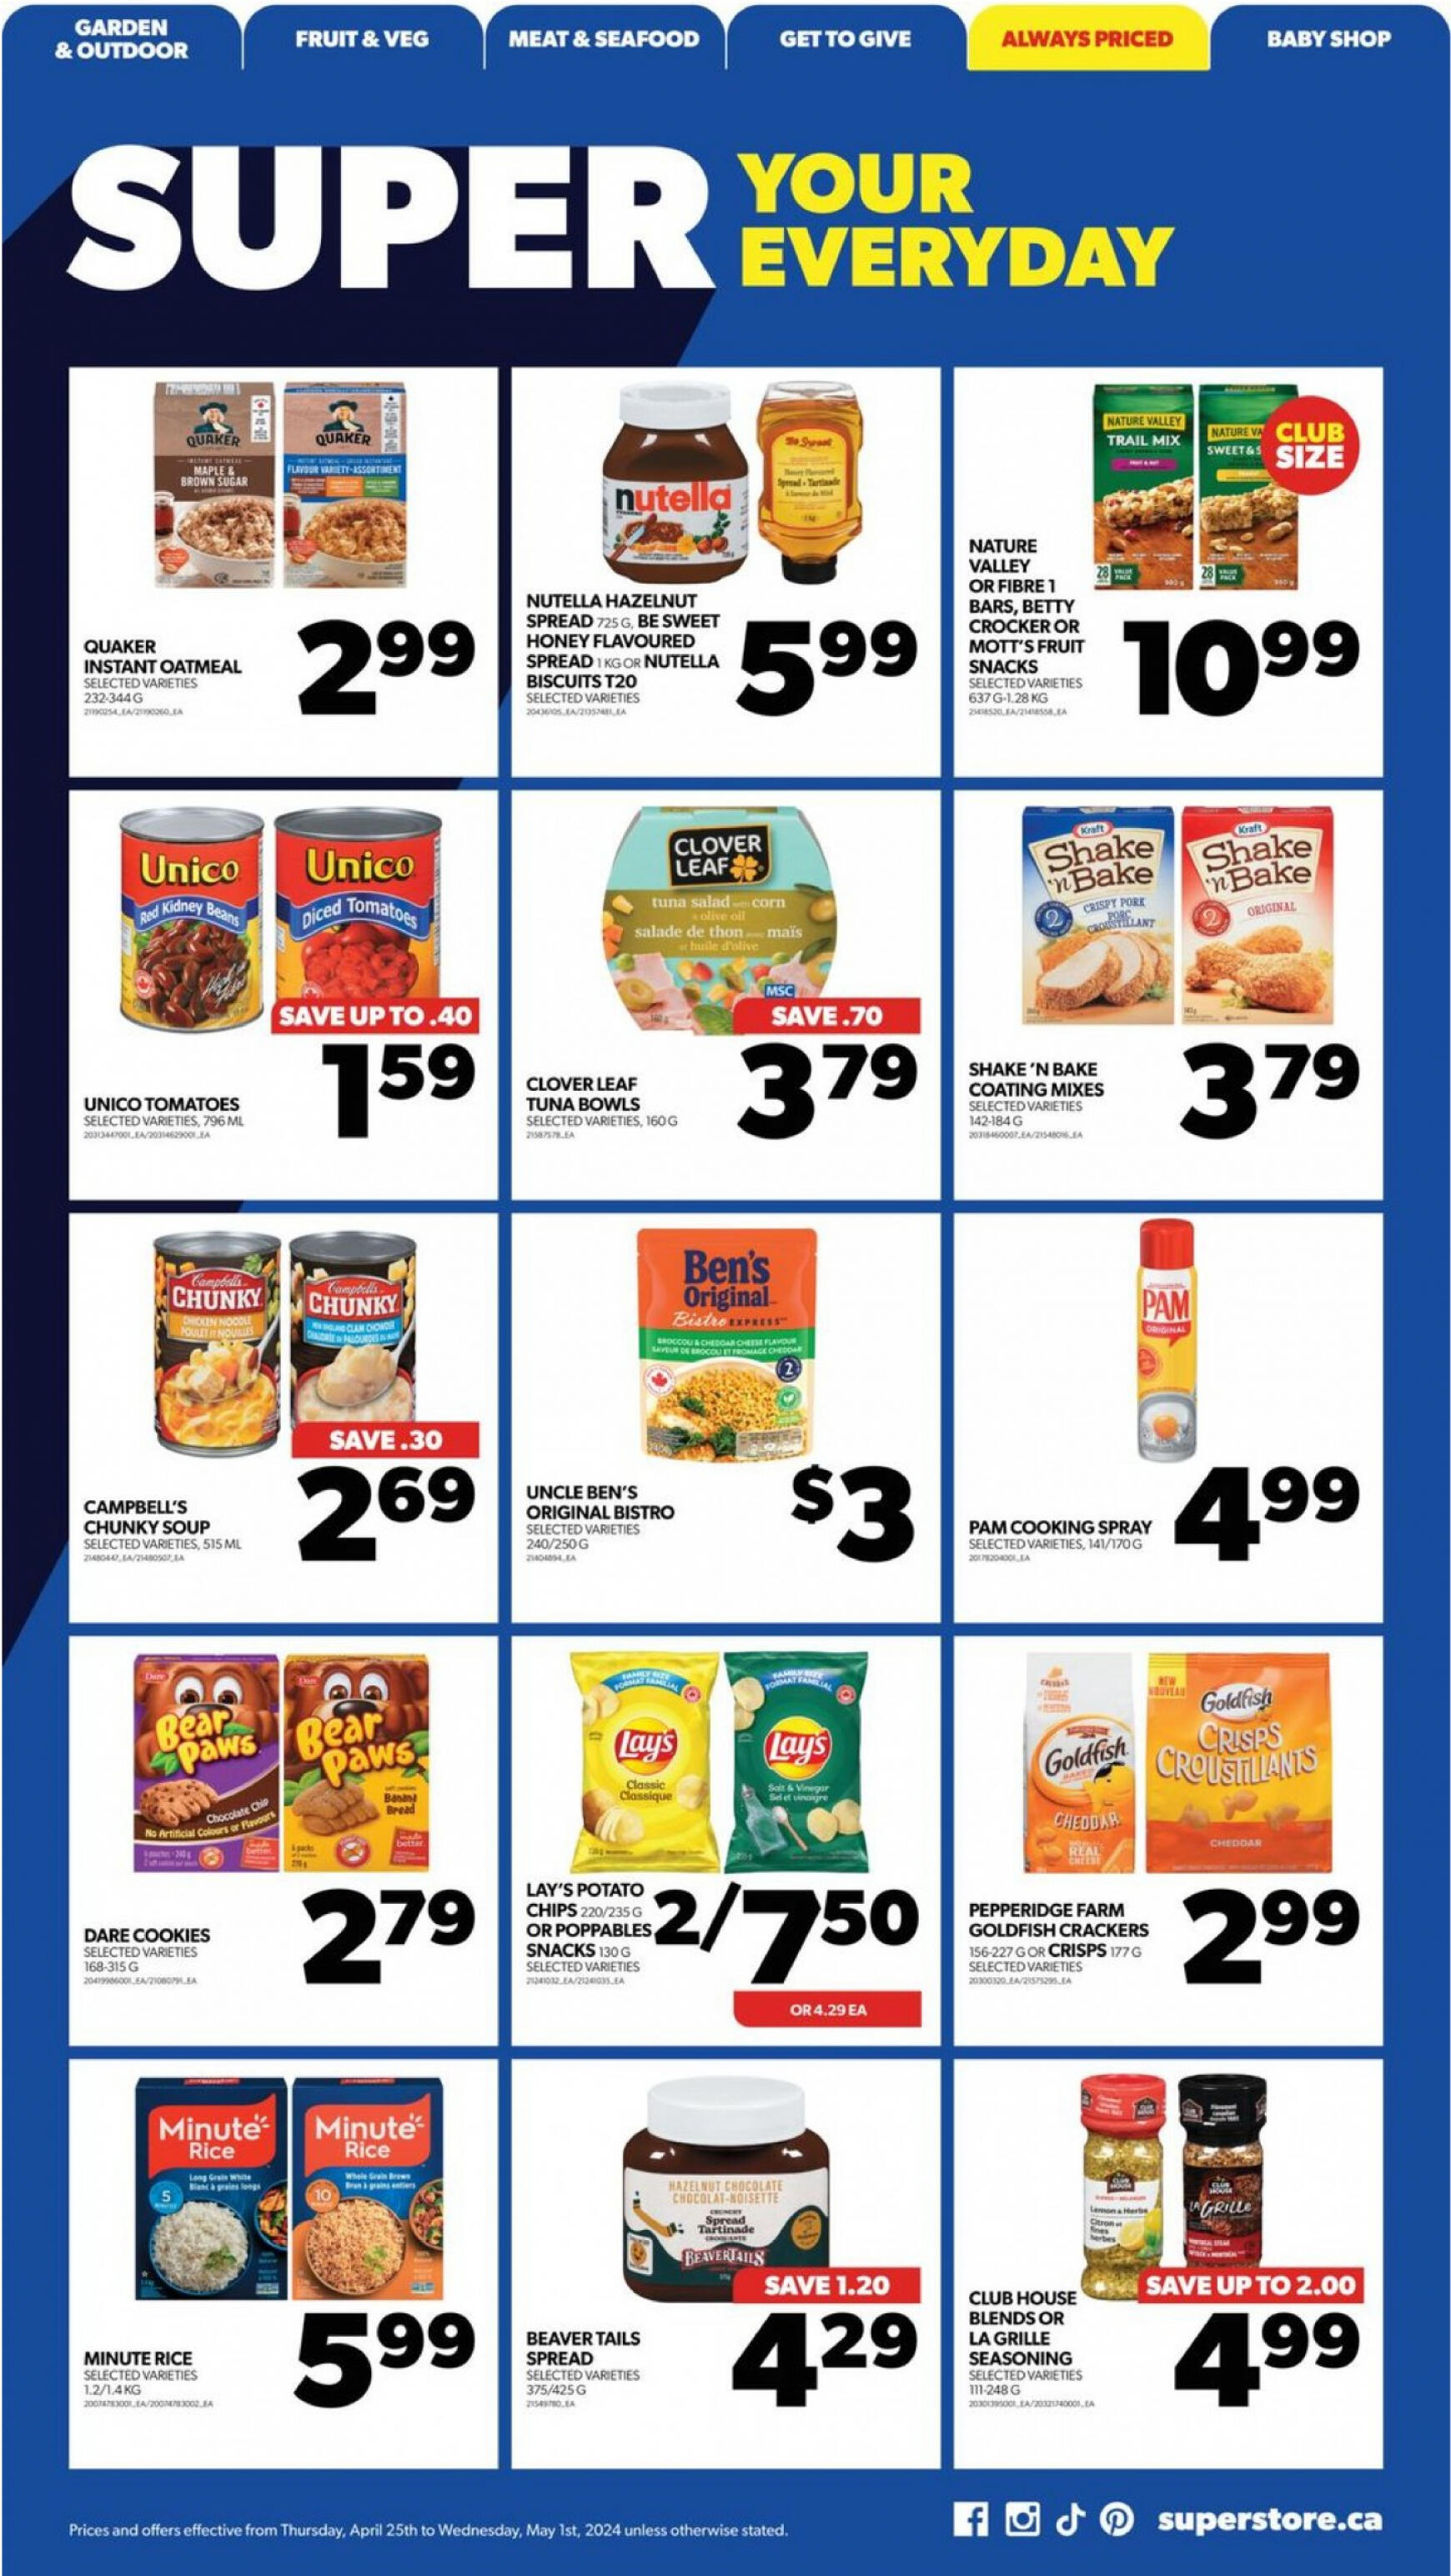 real-canadian-superstore - Real Canadian Superstore flyer current 01.05. - 31.05. - page: 19